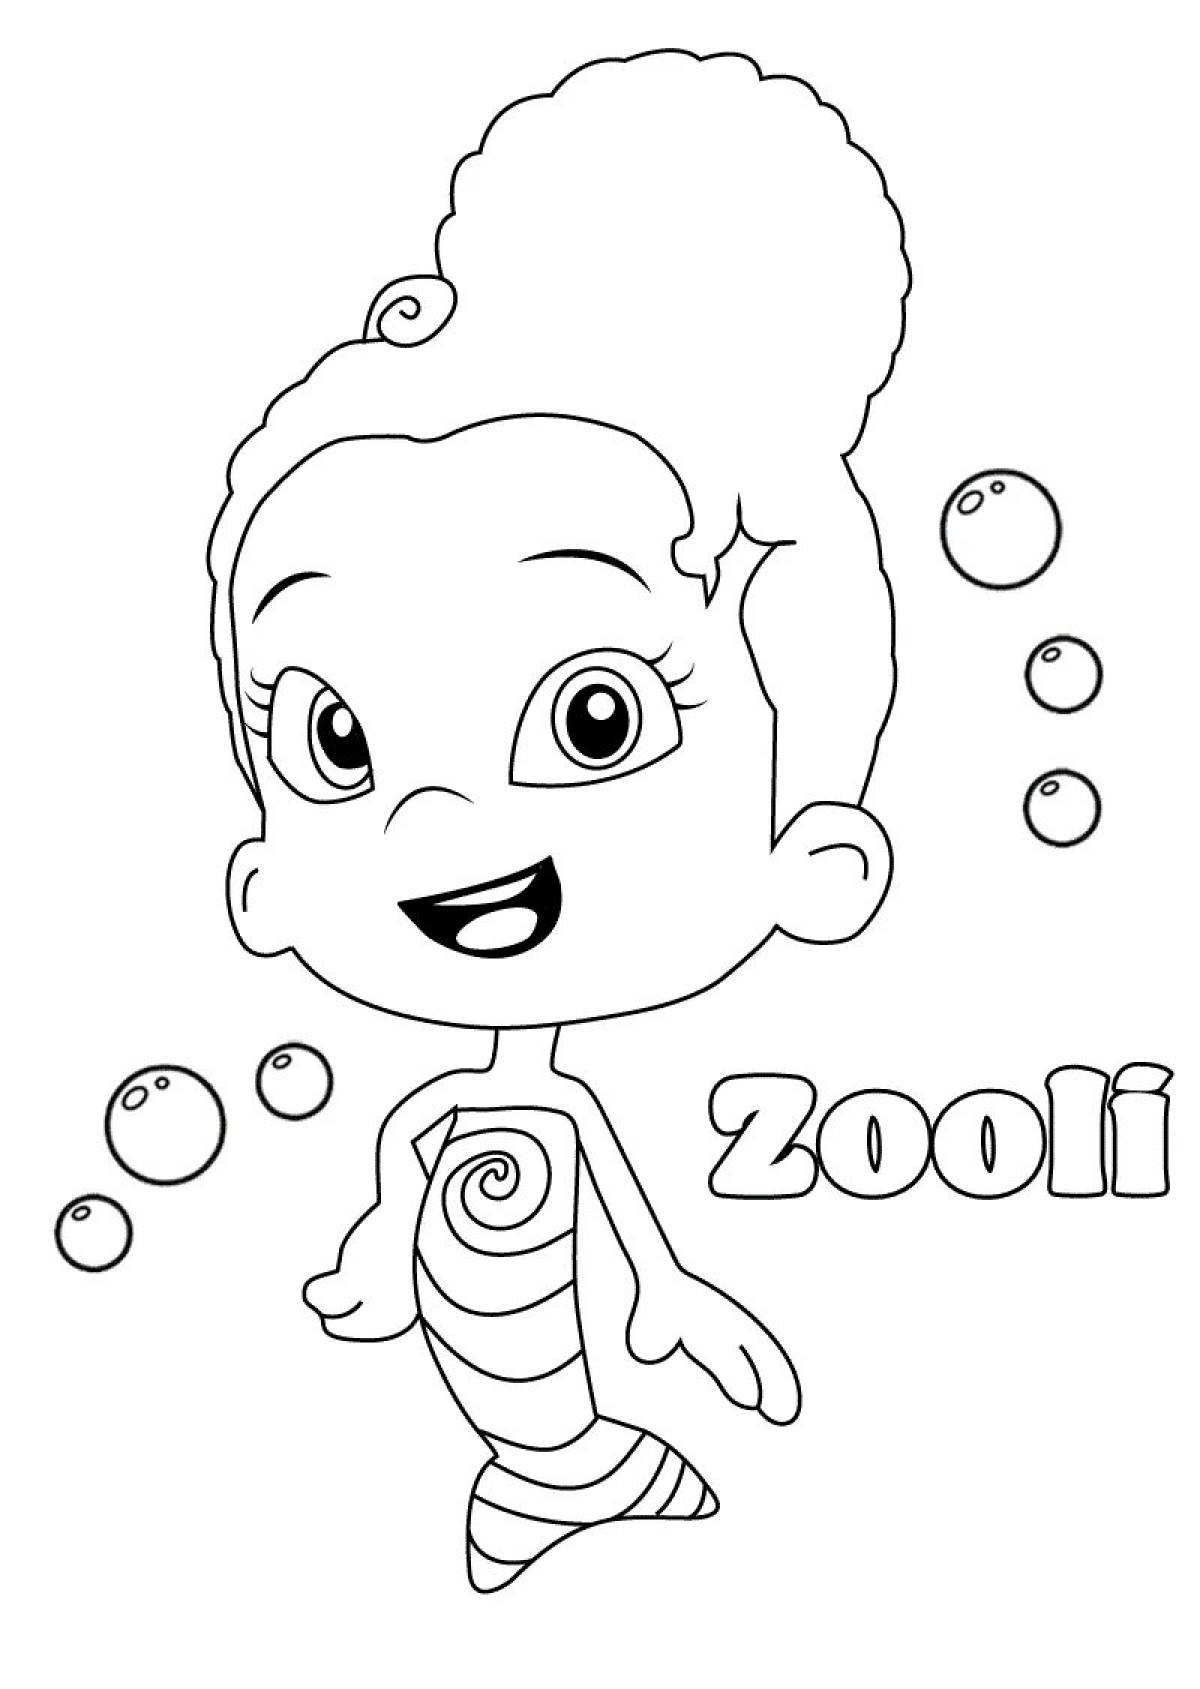 Incredible bubble coloring page